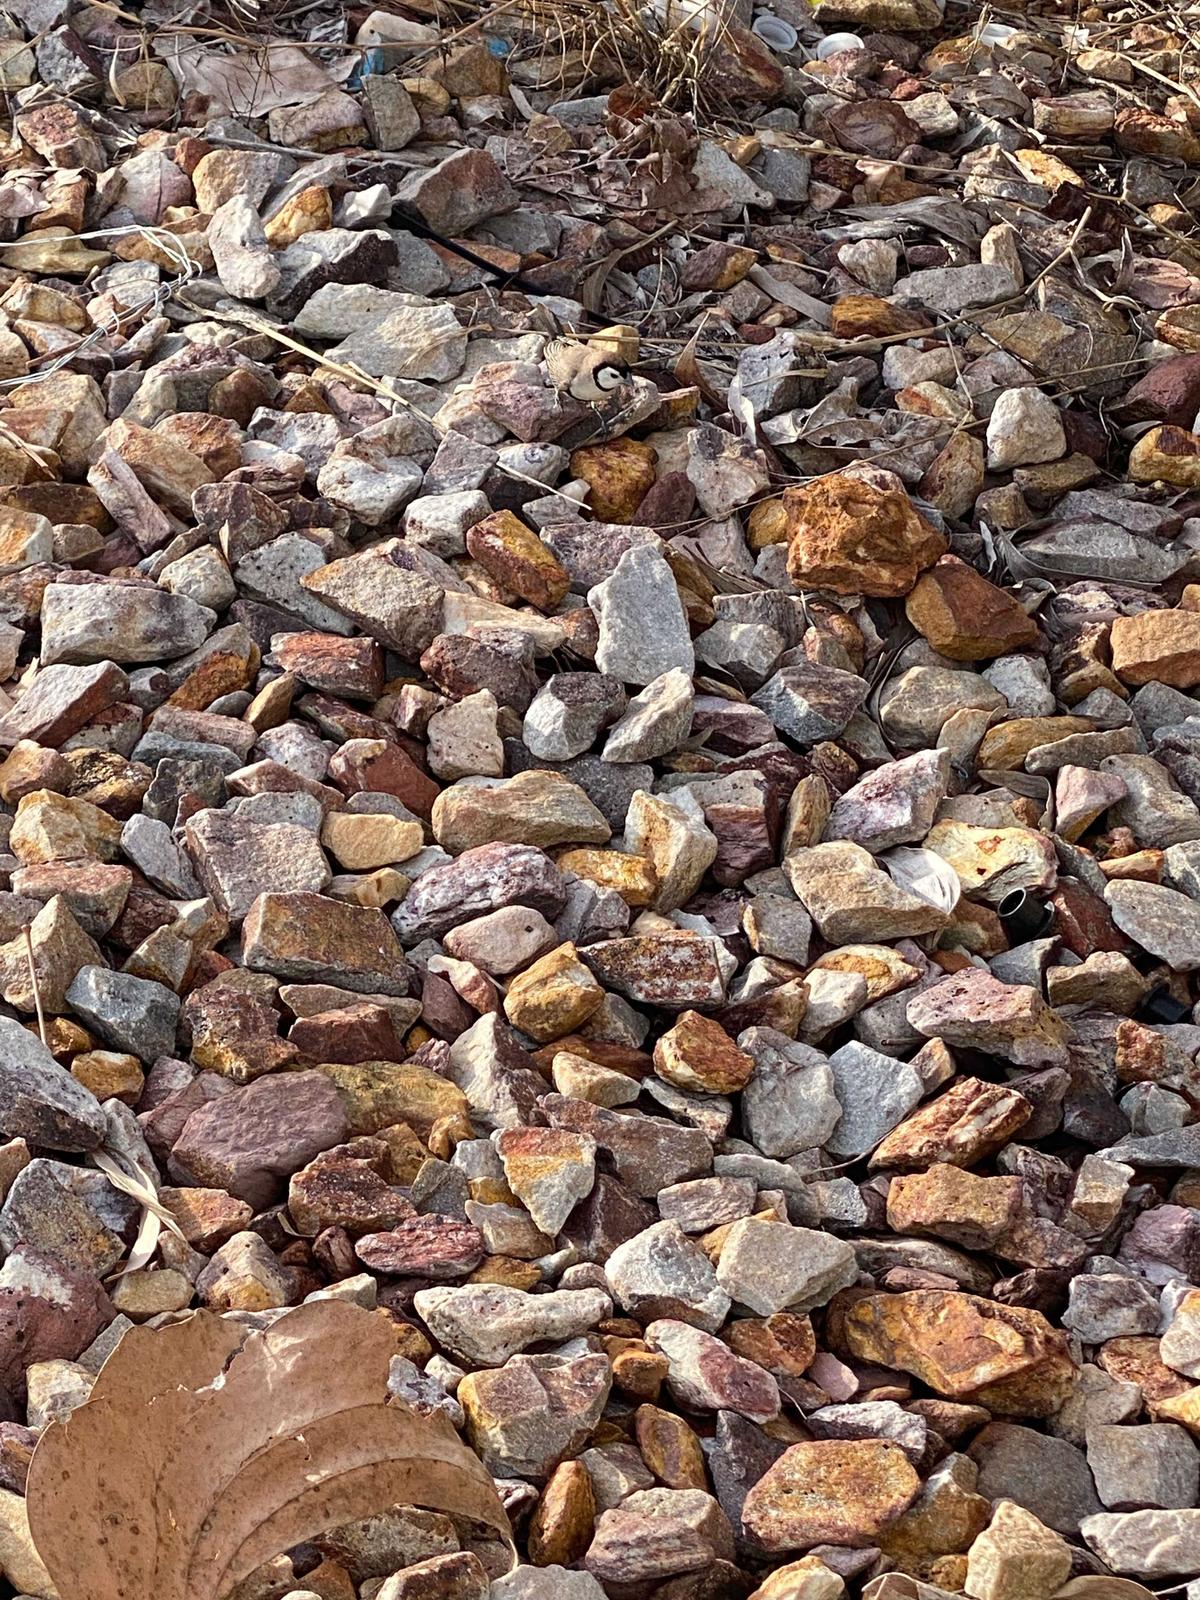 Another finch hiding among the rocks. (Courtesy of Caters News)